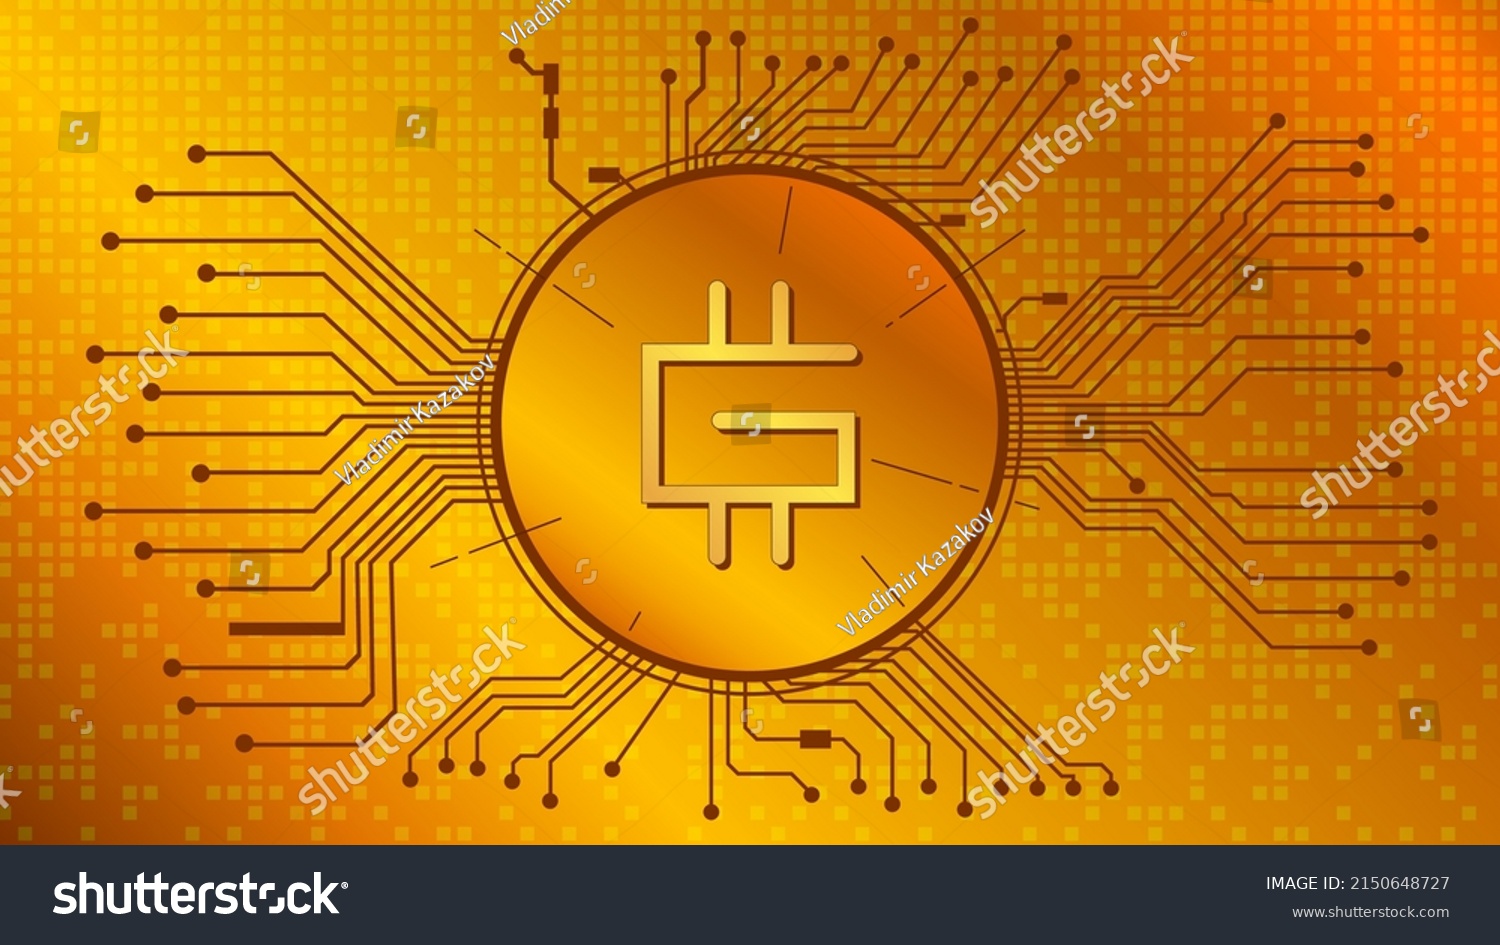 SVG of Stepn GMT cryptocurrency token symbol in circle with PCB tracks on gold background. Digital currency coin icon in techno style for website or banner. Vector illustration. svg